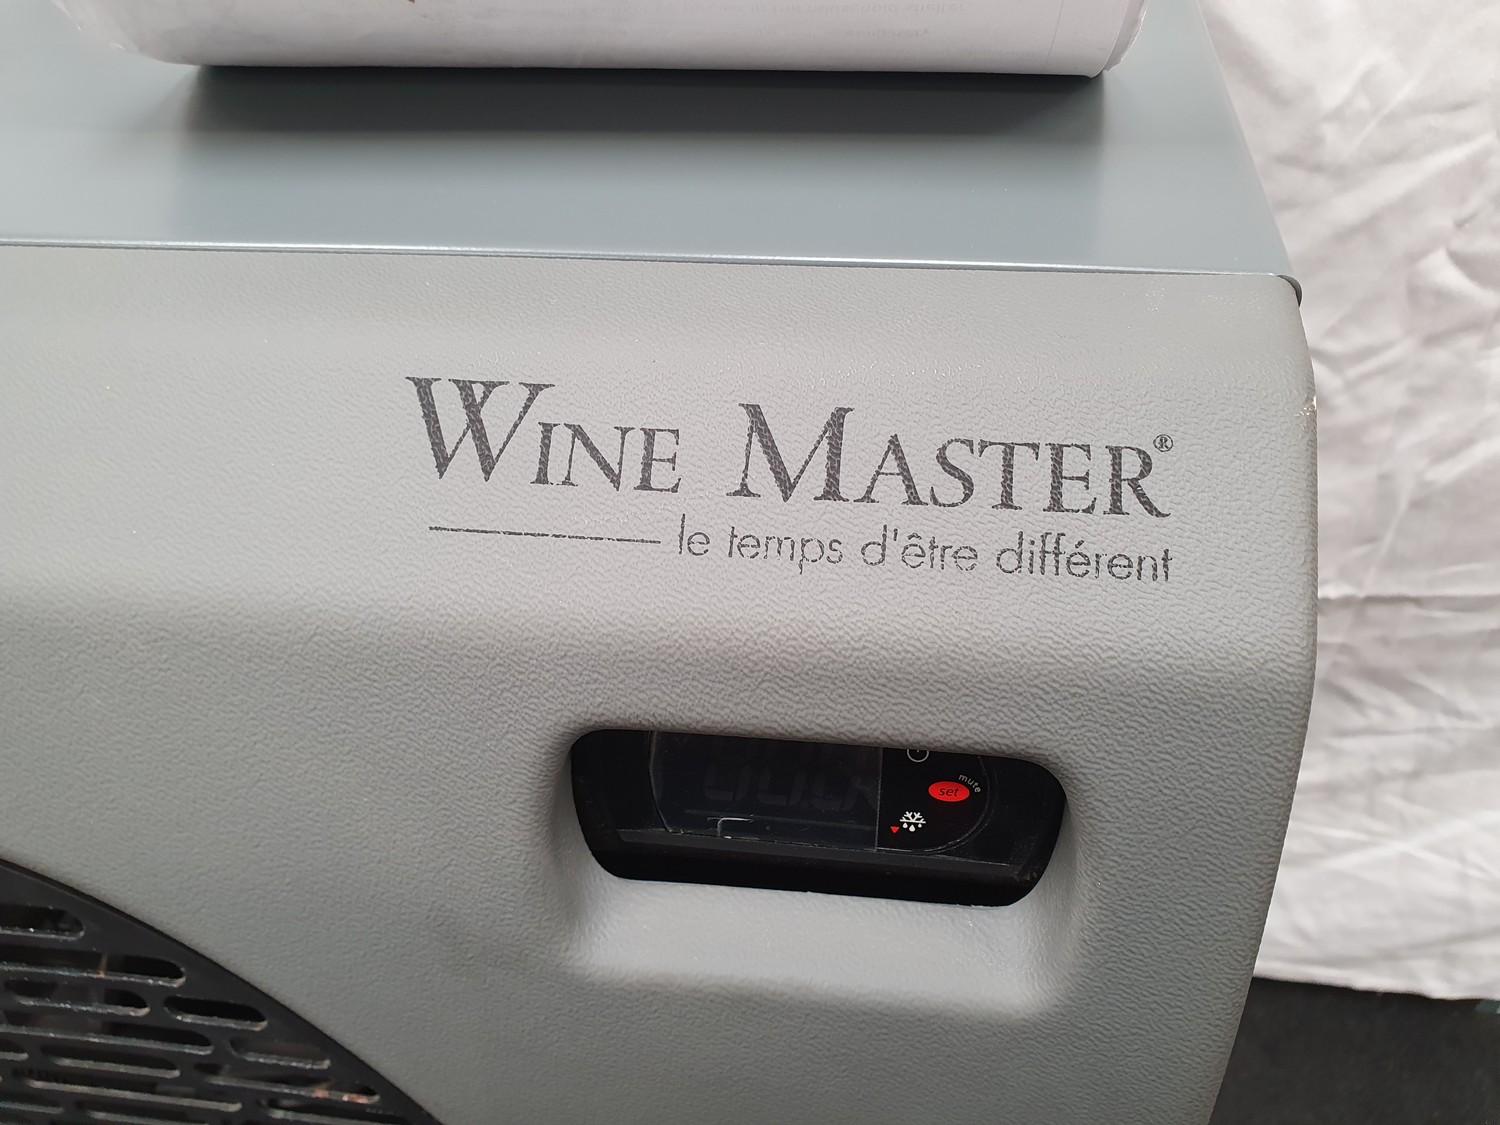 WineMaster WINE IN50 + Conditioning Unit with instruction manual. - Image 2 of 6